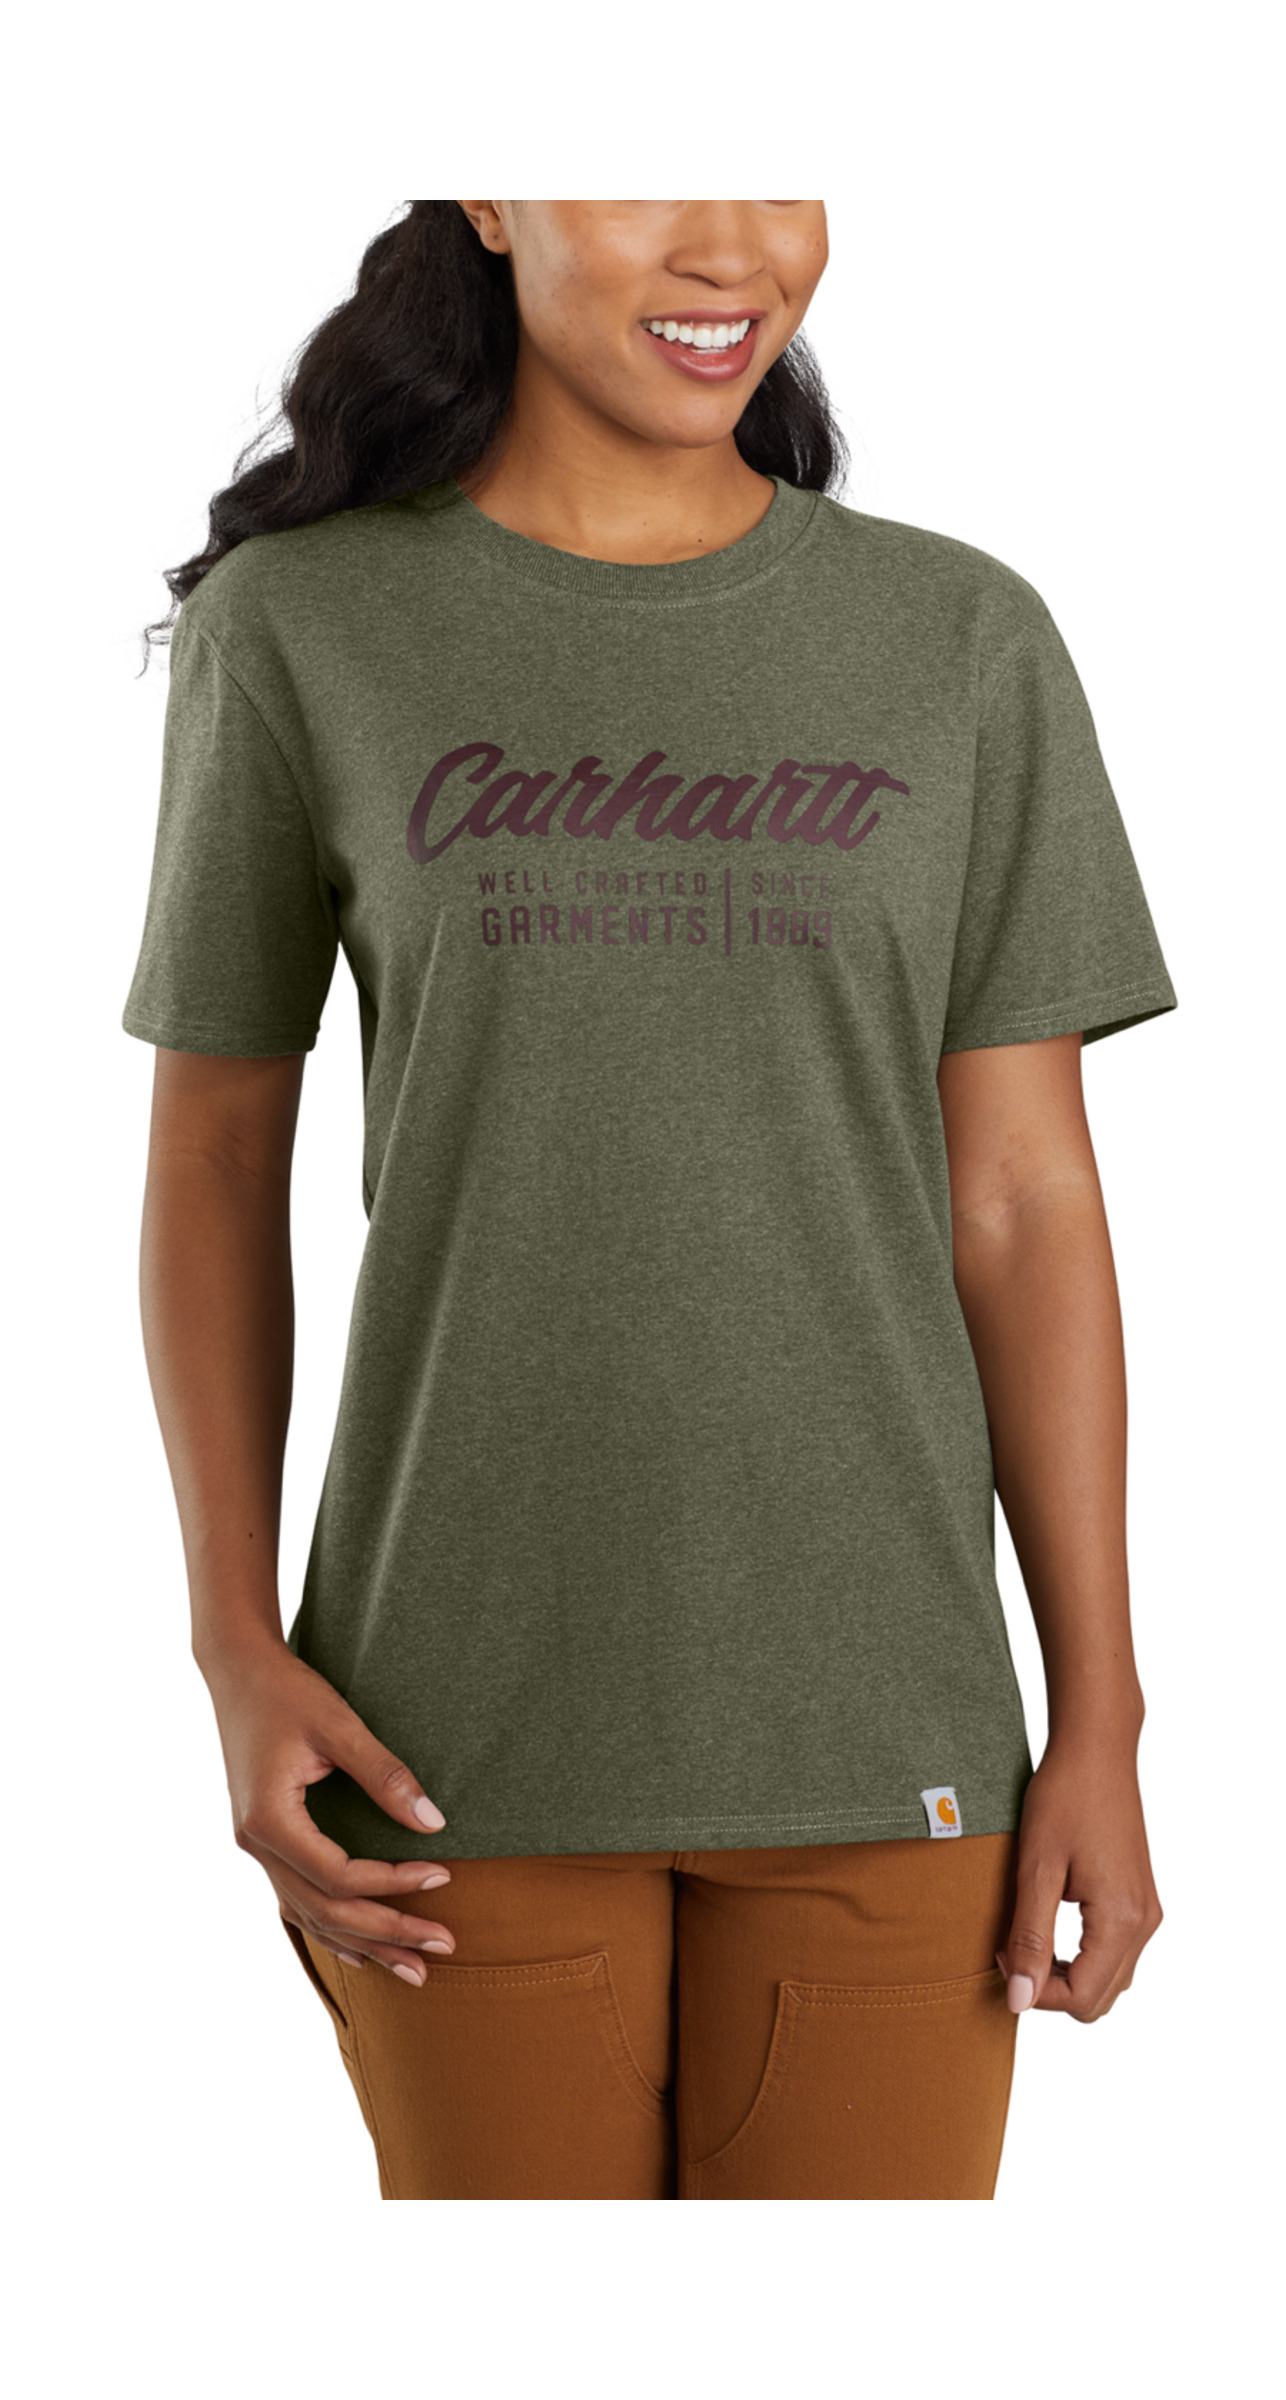 Carhartt CRAFTED GRAPHIC S/S T-SHIRT